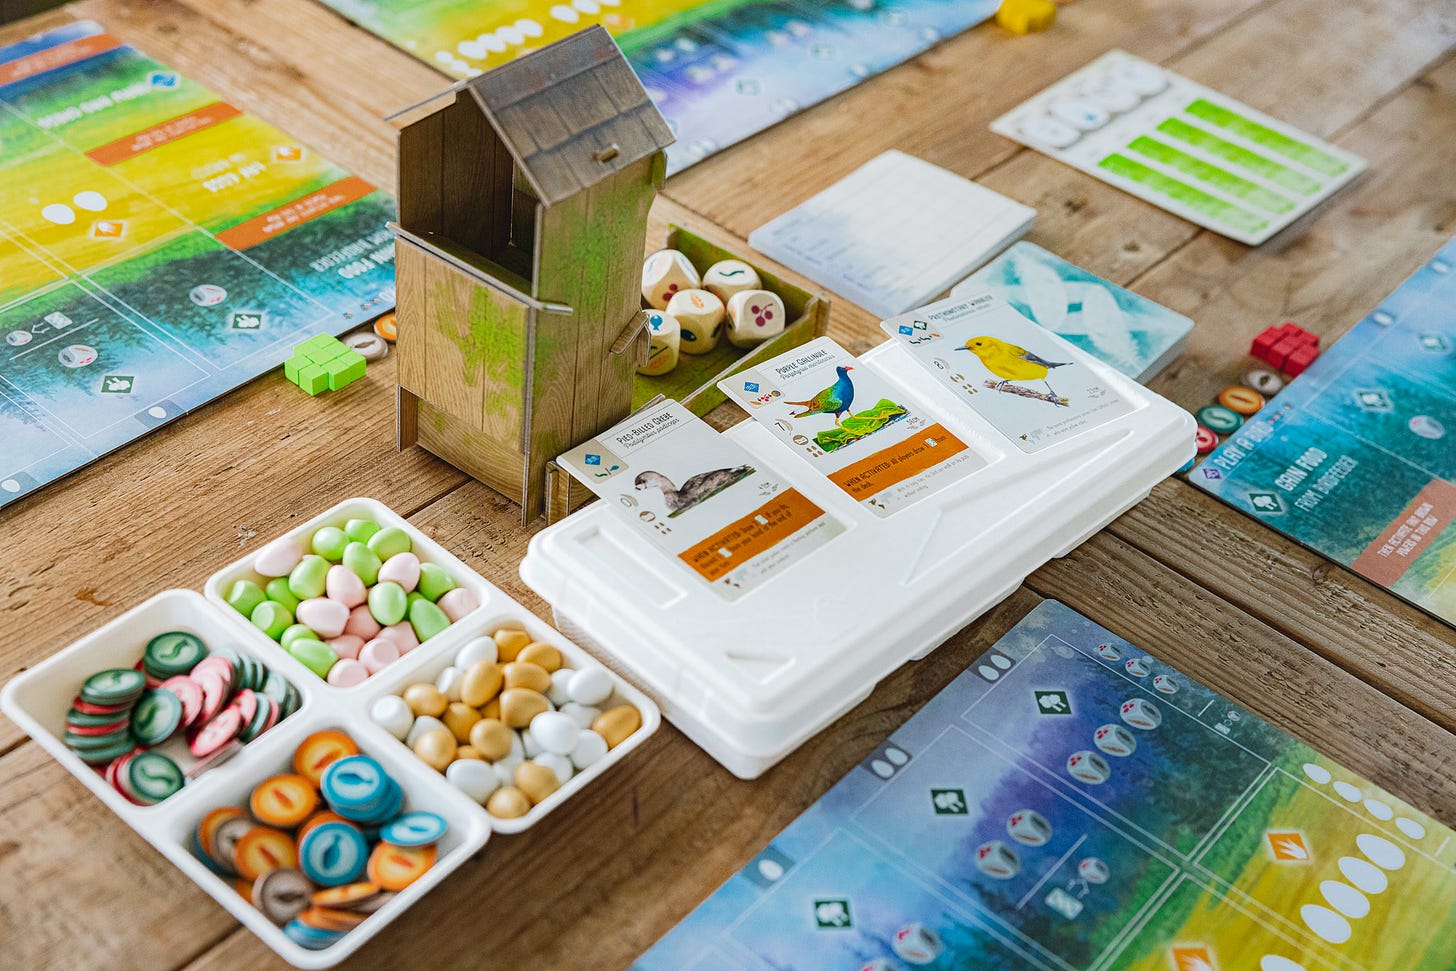 Game components from the plastic-free edition of Wingspan